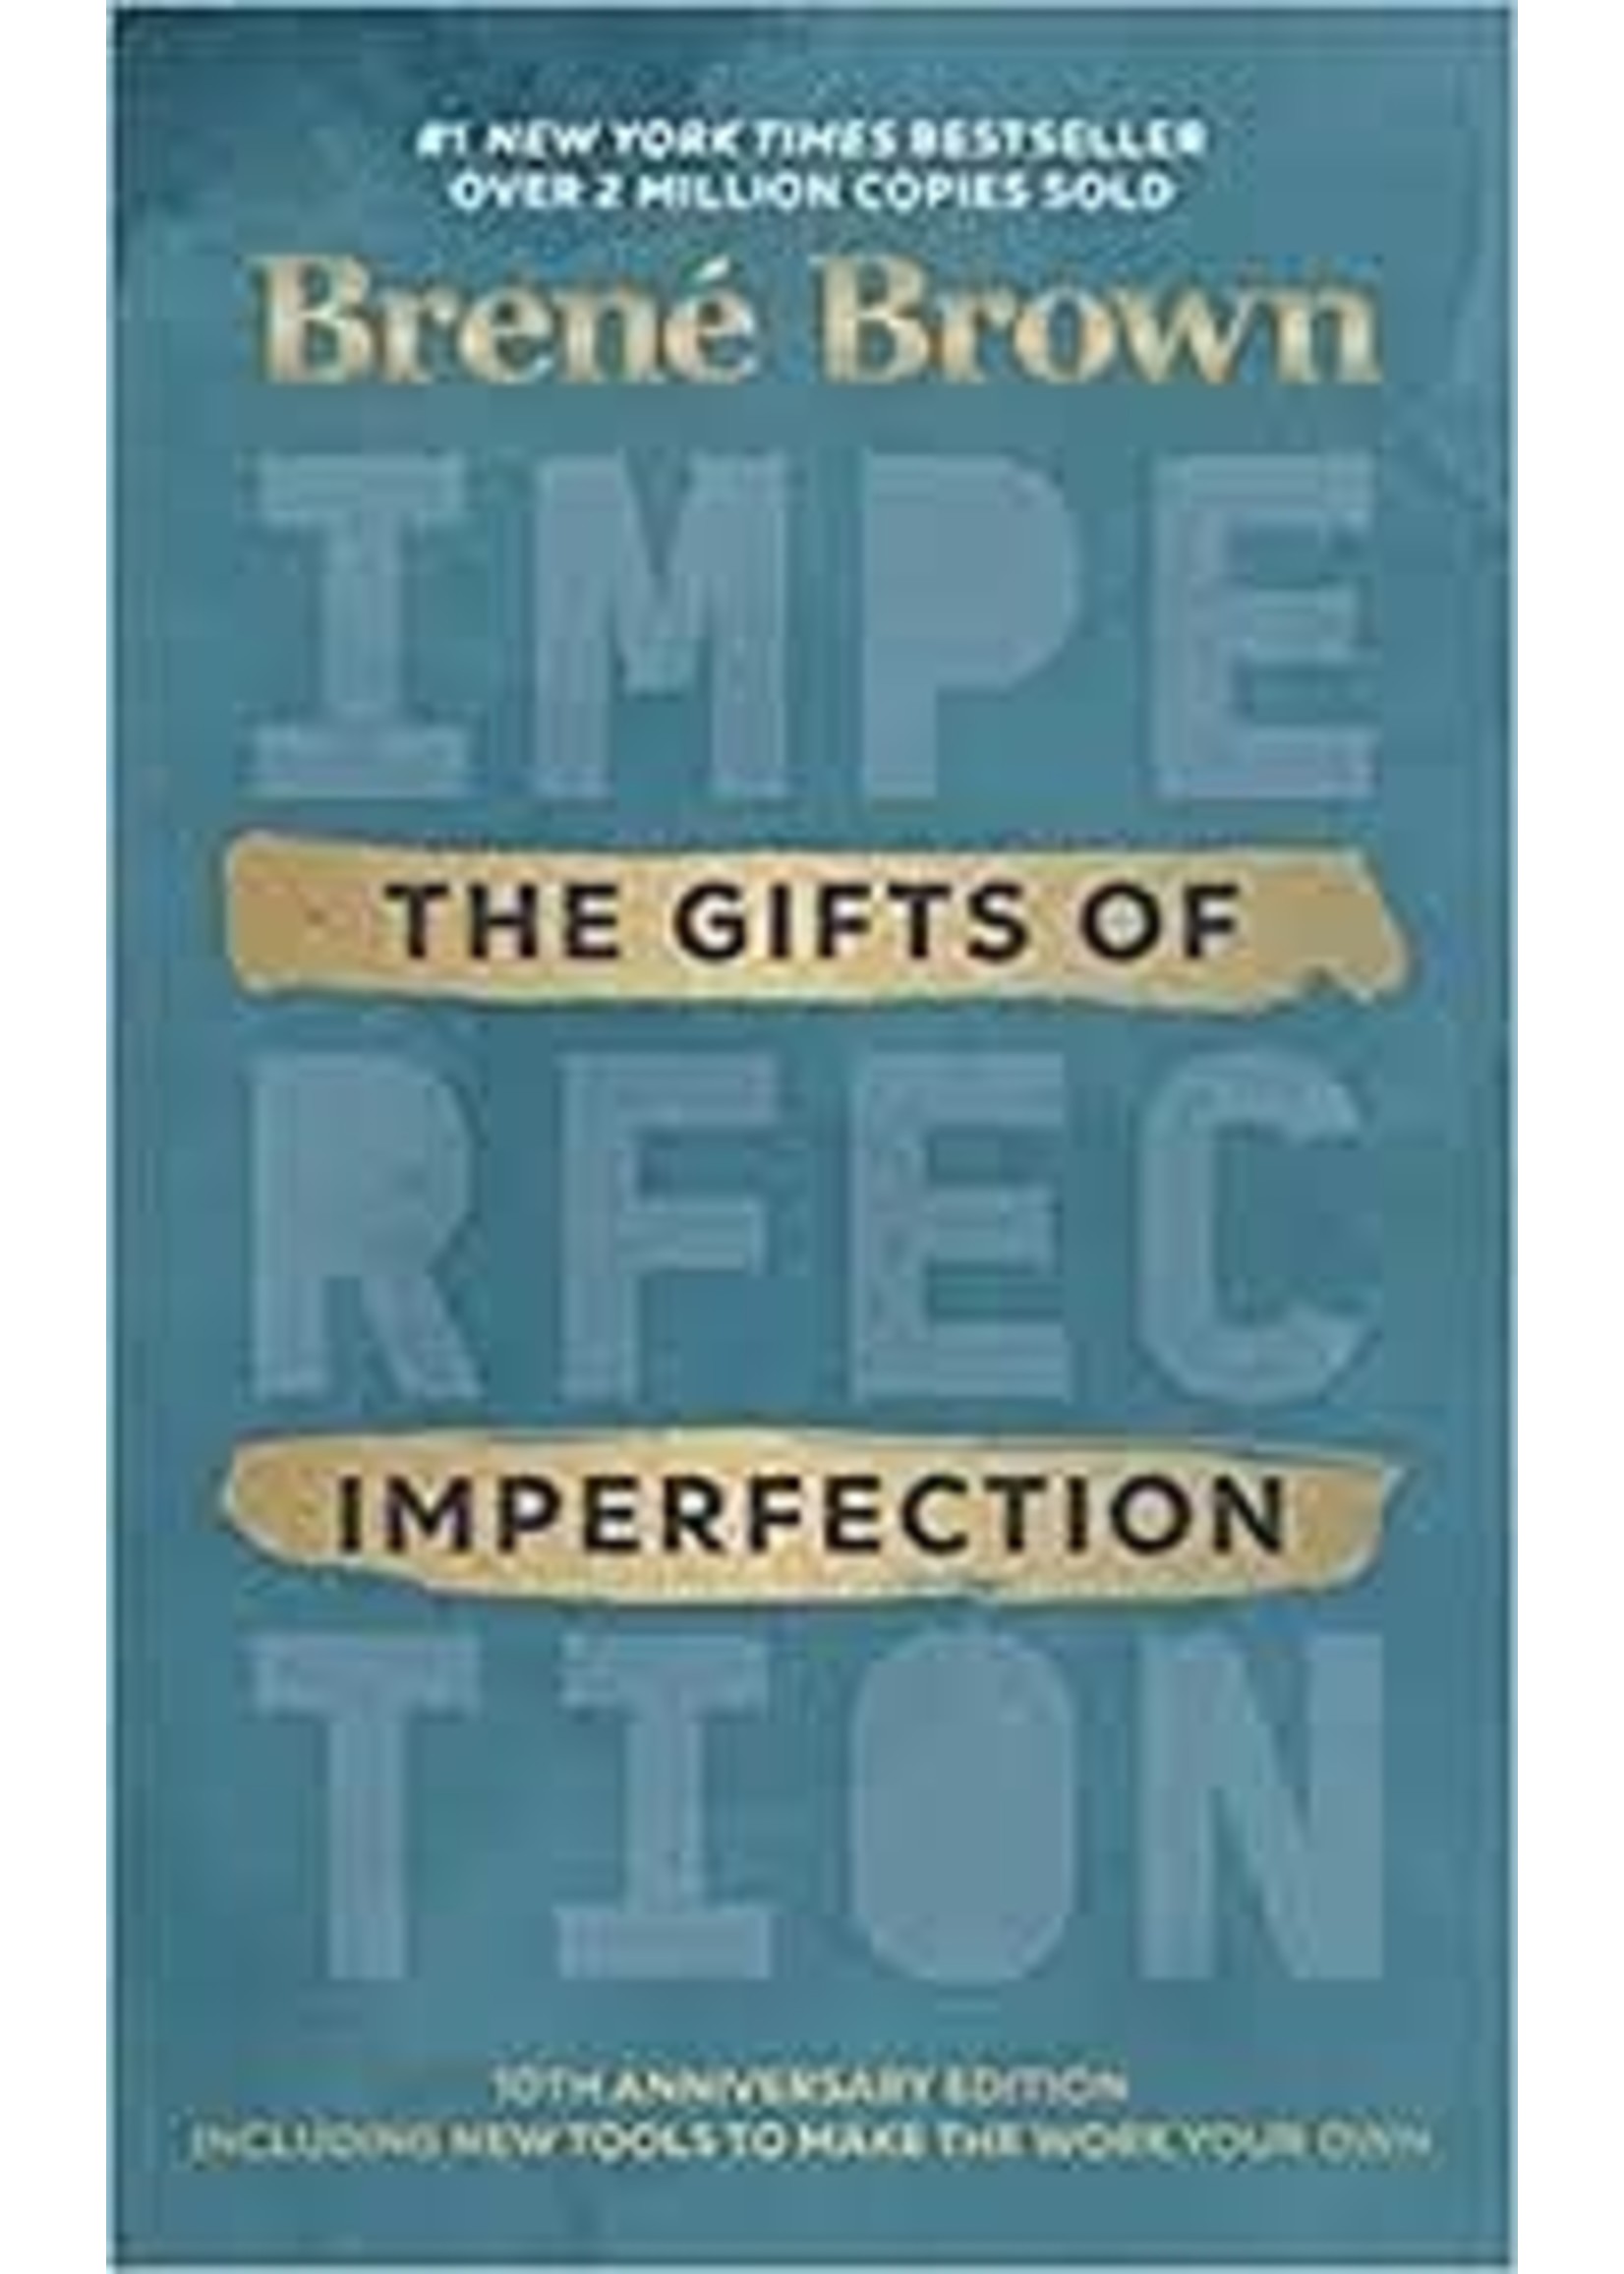 Gifts of Imperfection - 10th Anniversary Edition